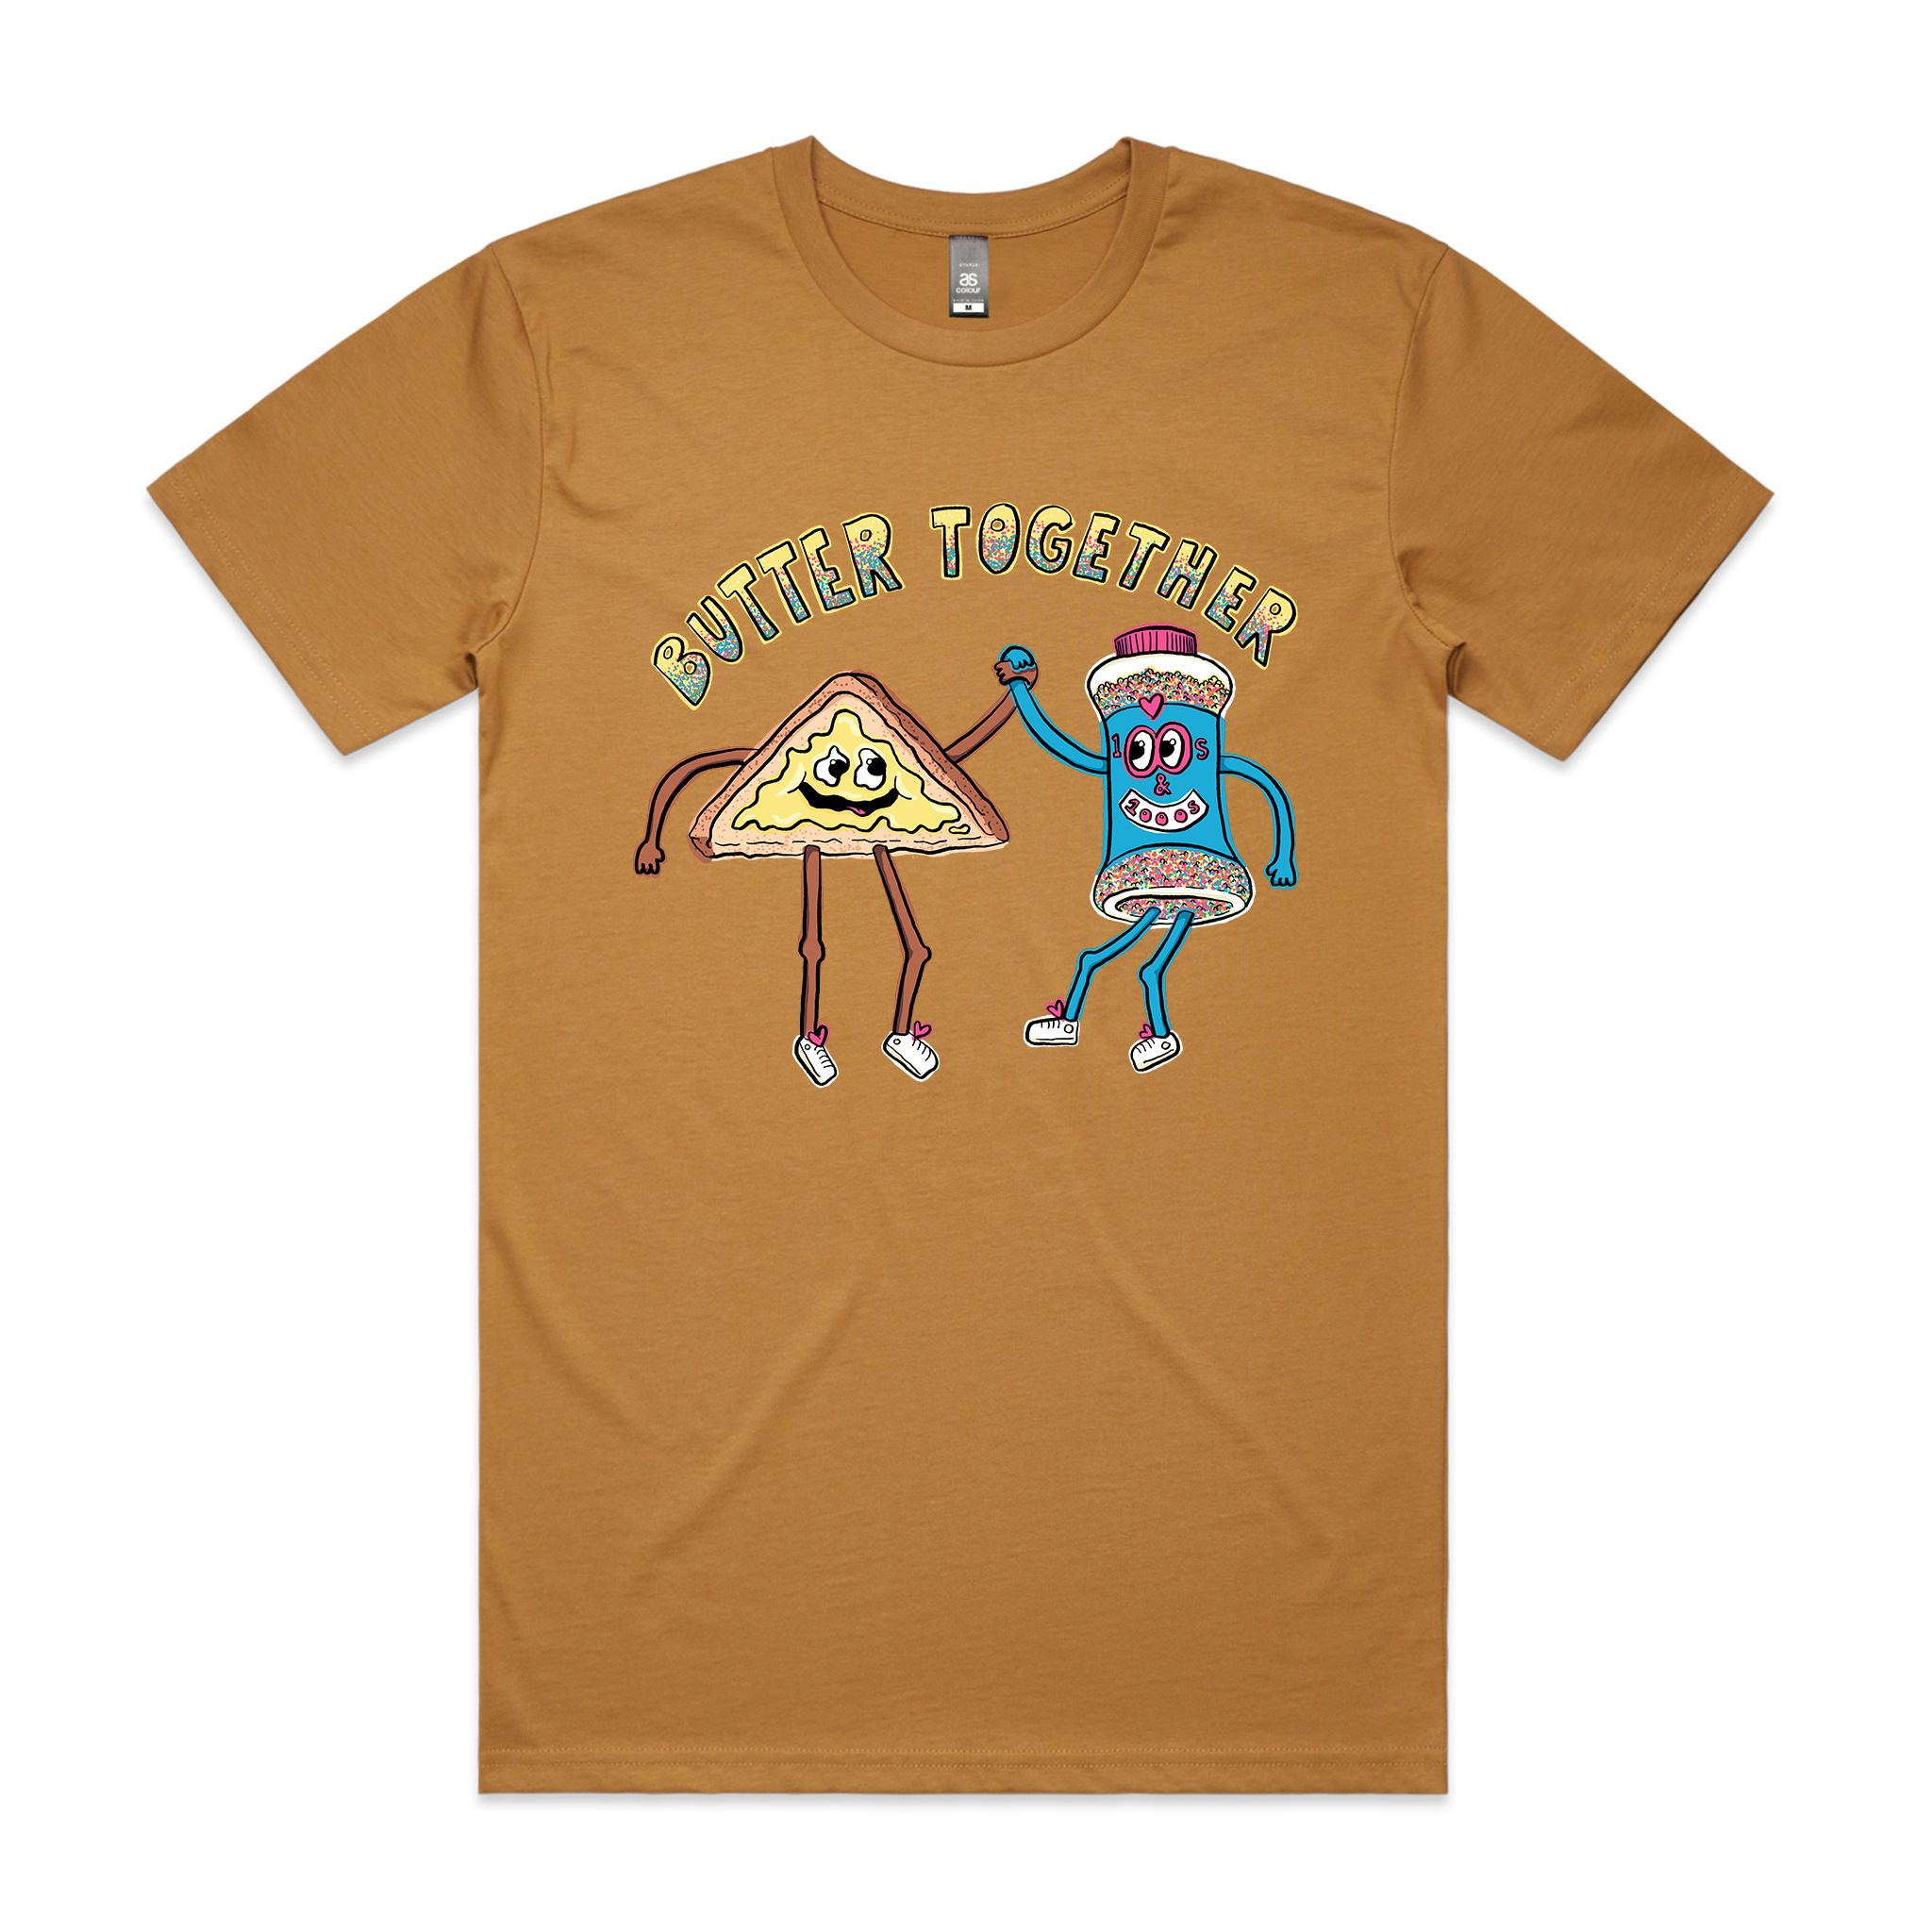 Butter Together Tee